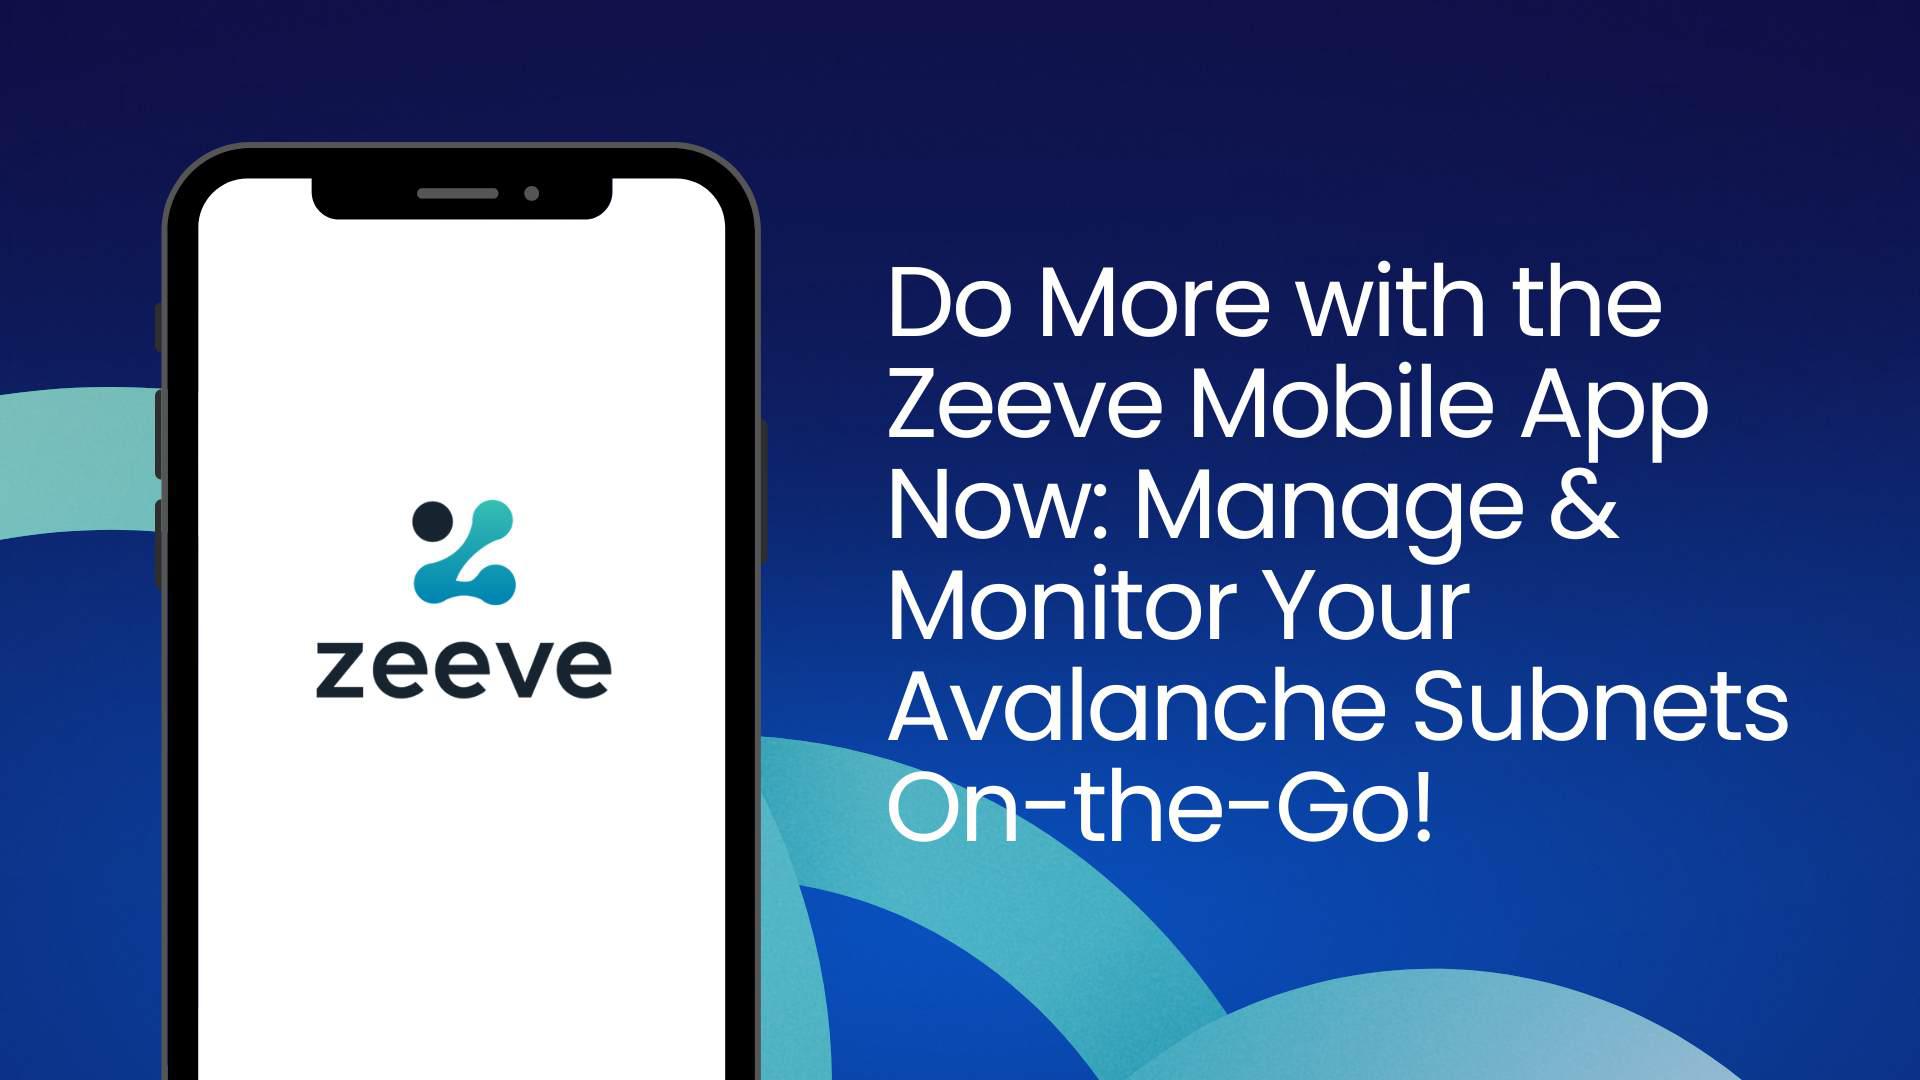 Zeeve Mobile App: Manage Your Avalanche Subnets